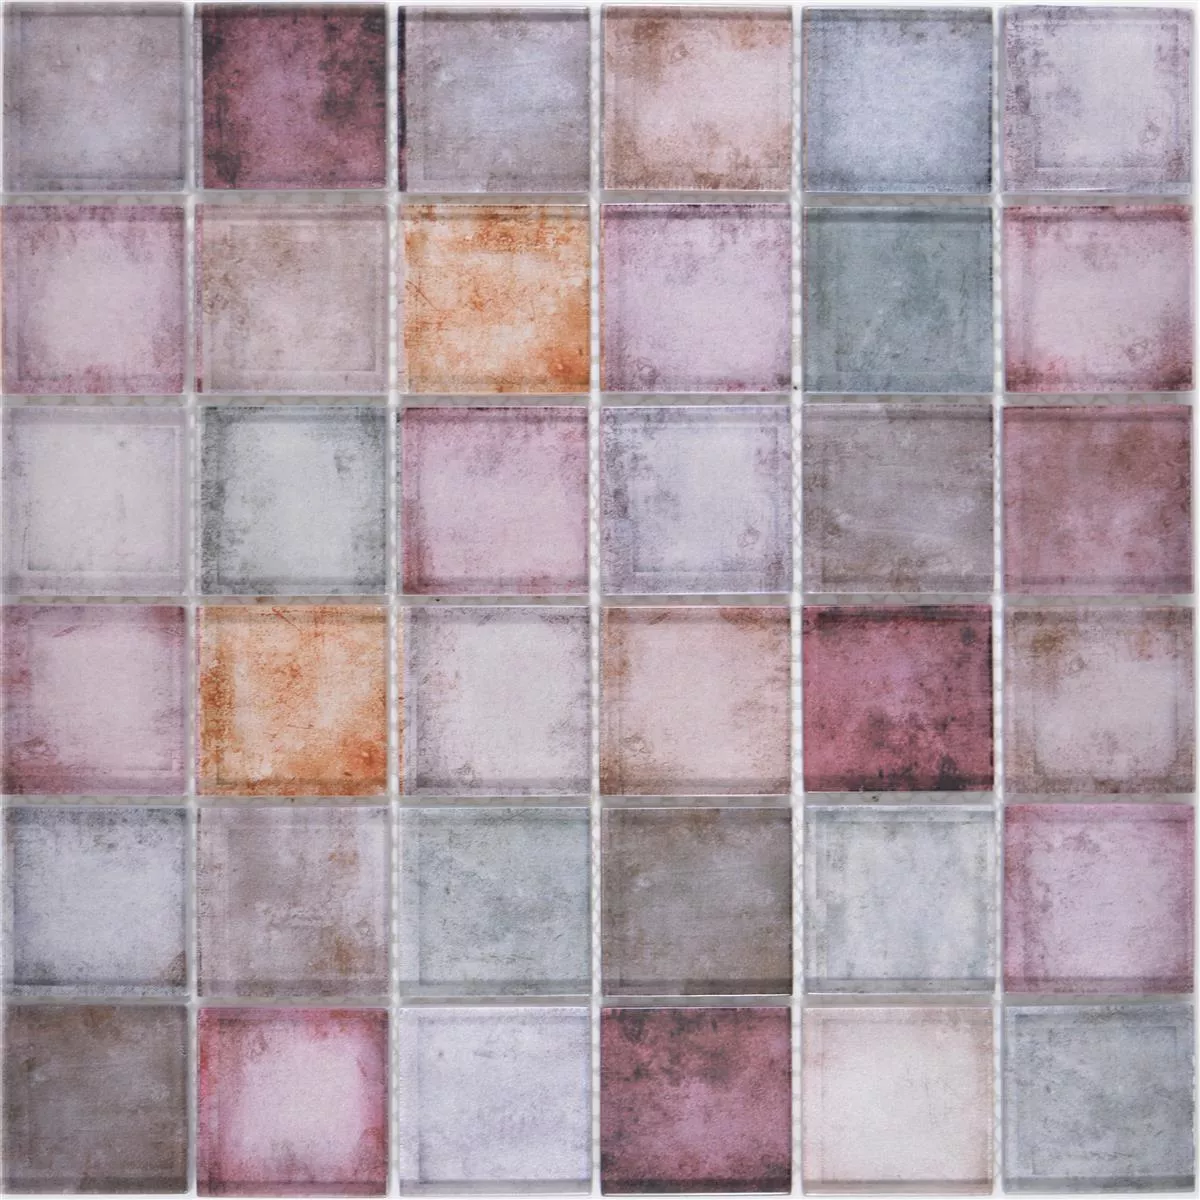 Glass Mosaic Tiles Clementine Colored